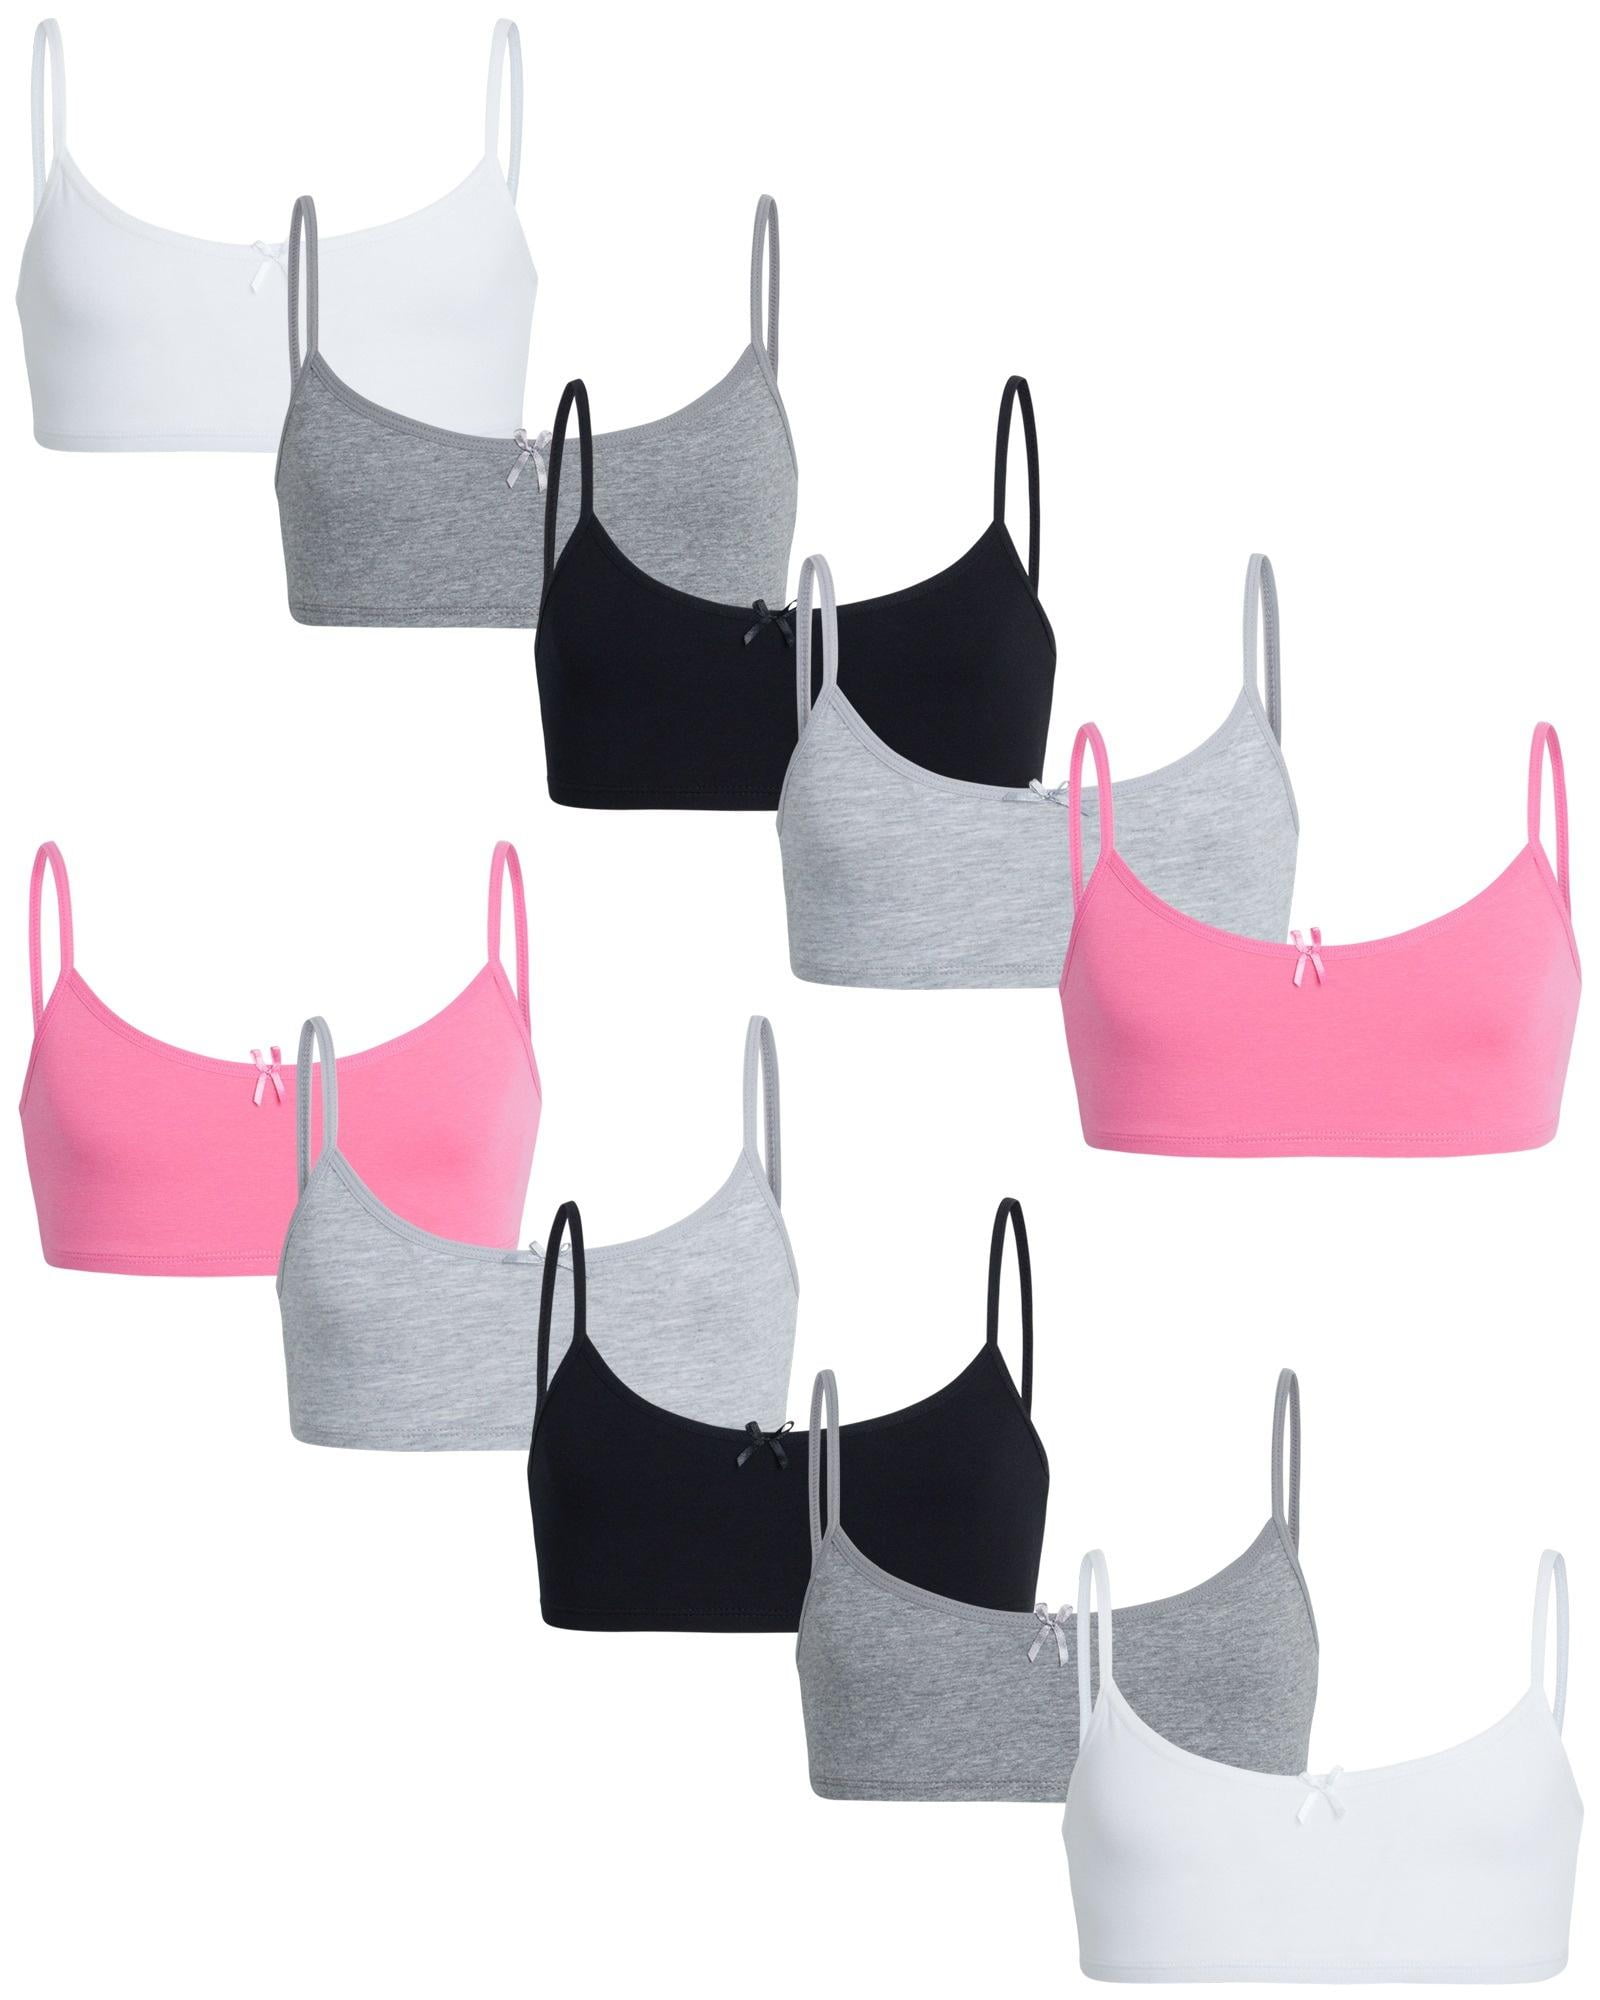 Womens Girls Strap Built In Bra Padded Self Mold Bra Tank Top Camisole Cami